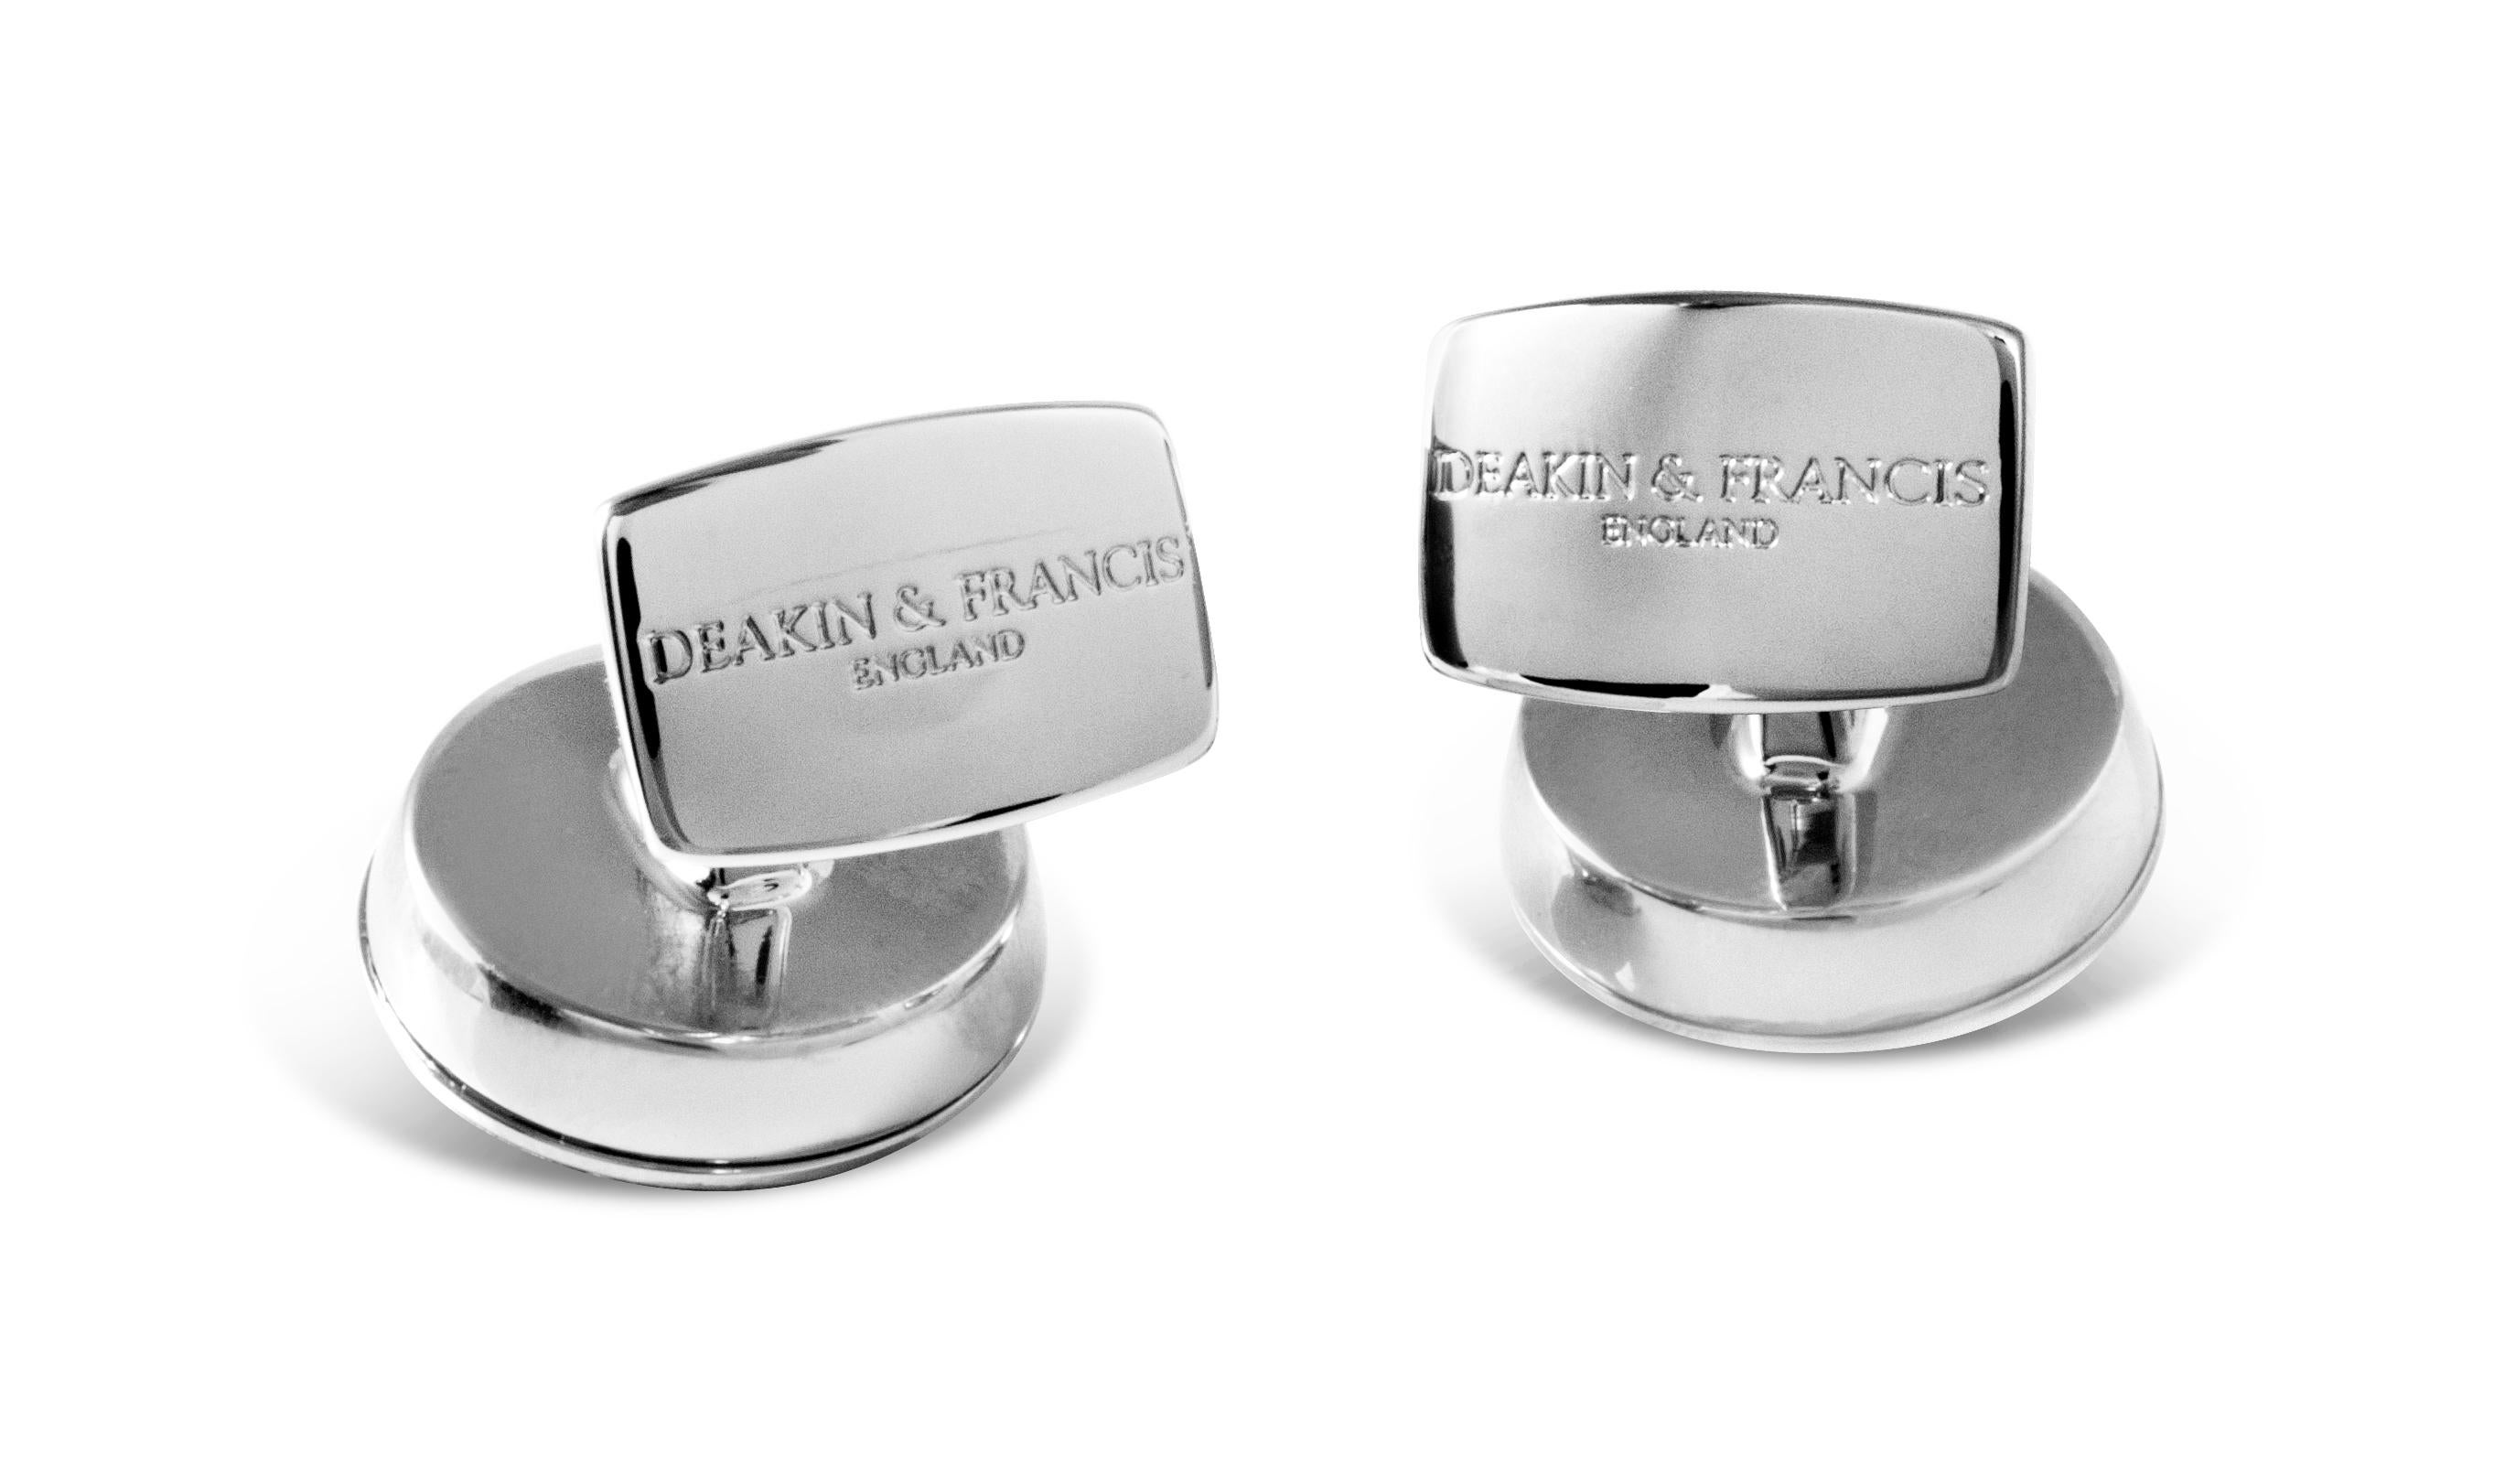 DEAKIN & FRANCIS, Piccadilly Arcade, London

These are truly unique cufflinks!

With a domed bubble enclosure, these locket cufflinks come with a set of cute, miniature red dice! Sure to be lucky, these are perfect for all of those with a risky